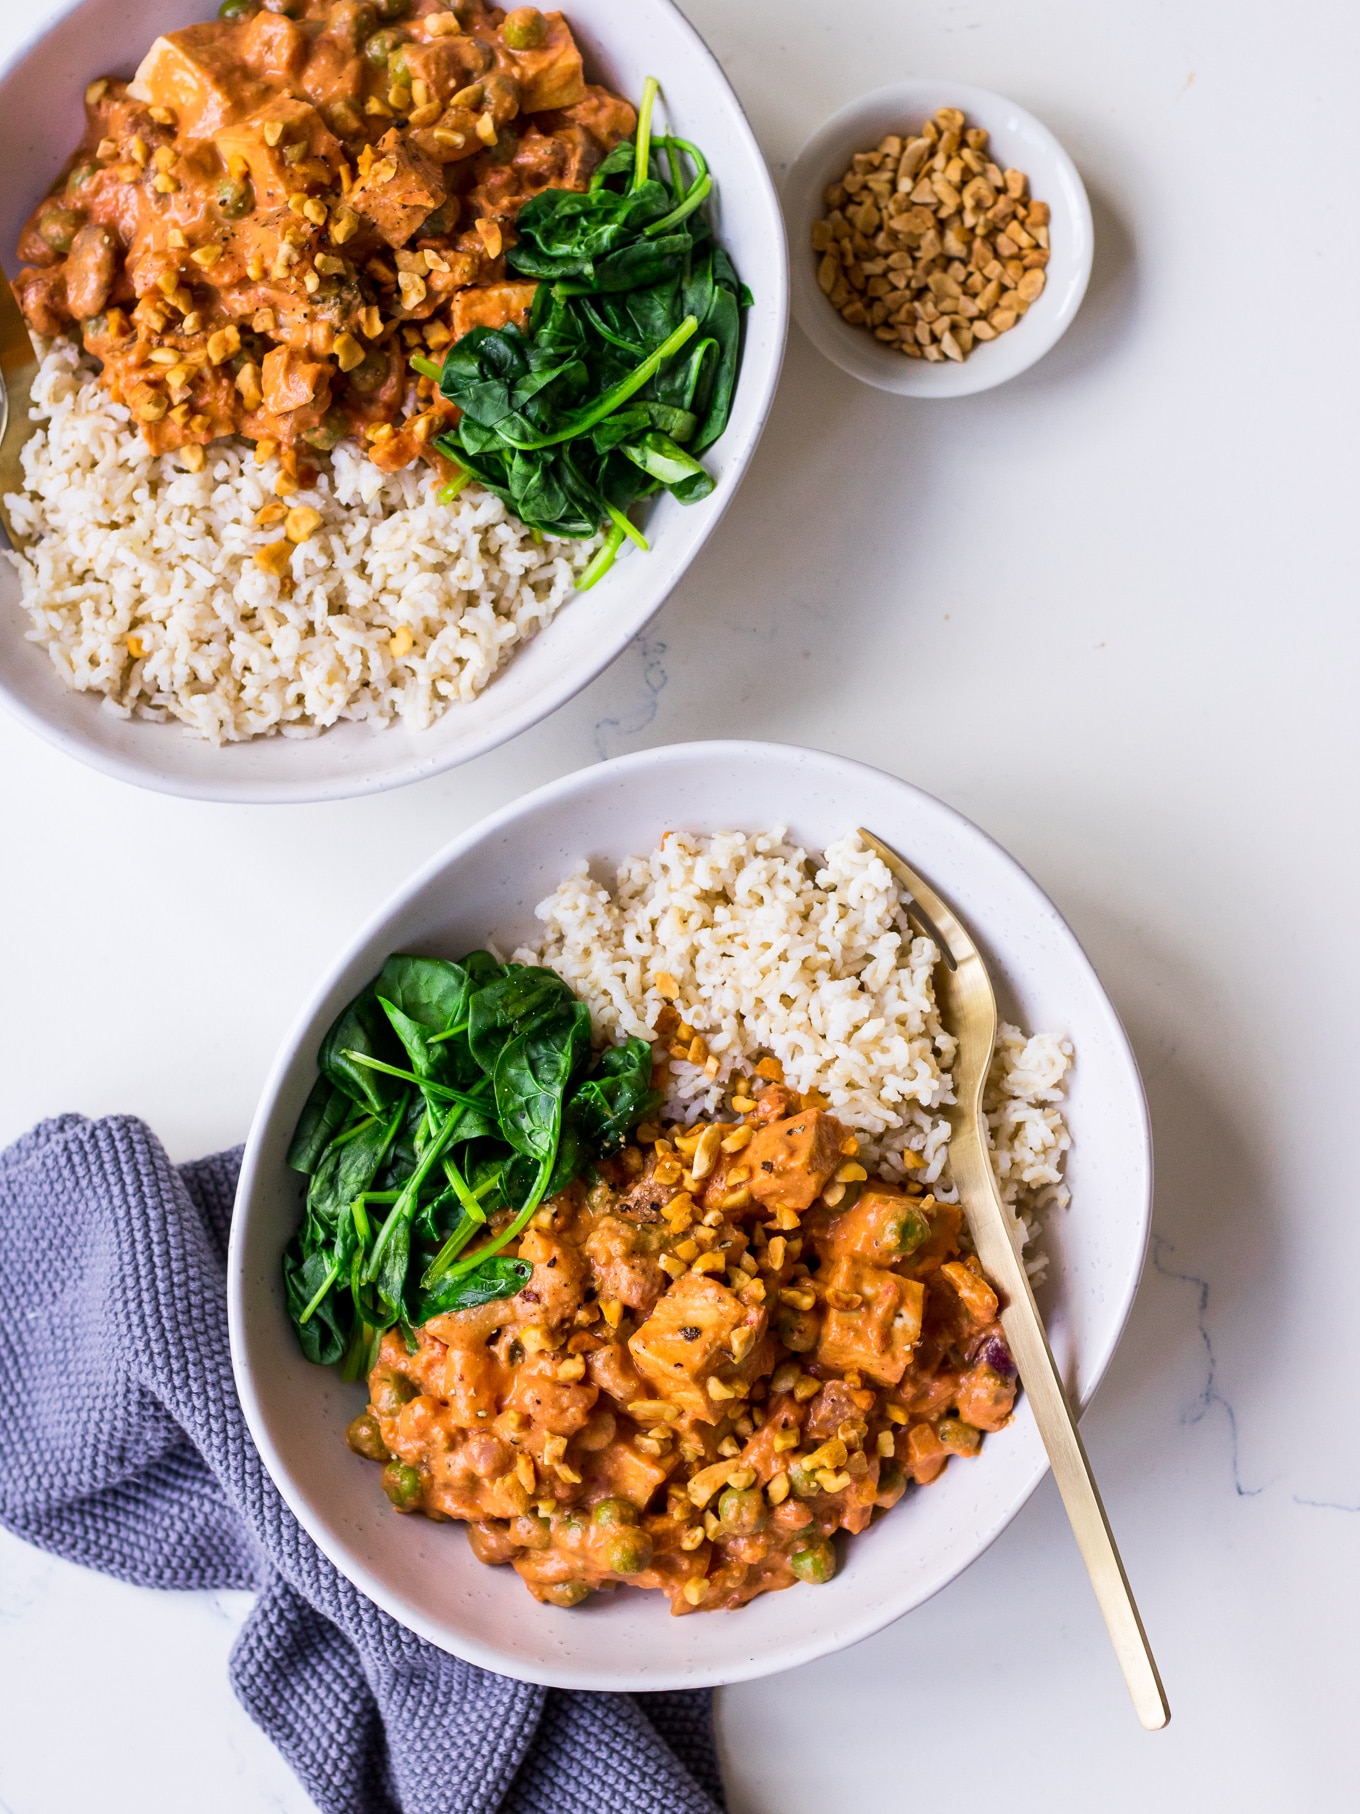 Peanut butter coconut curry with tofu, spinach and brown rice